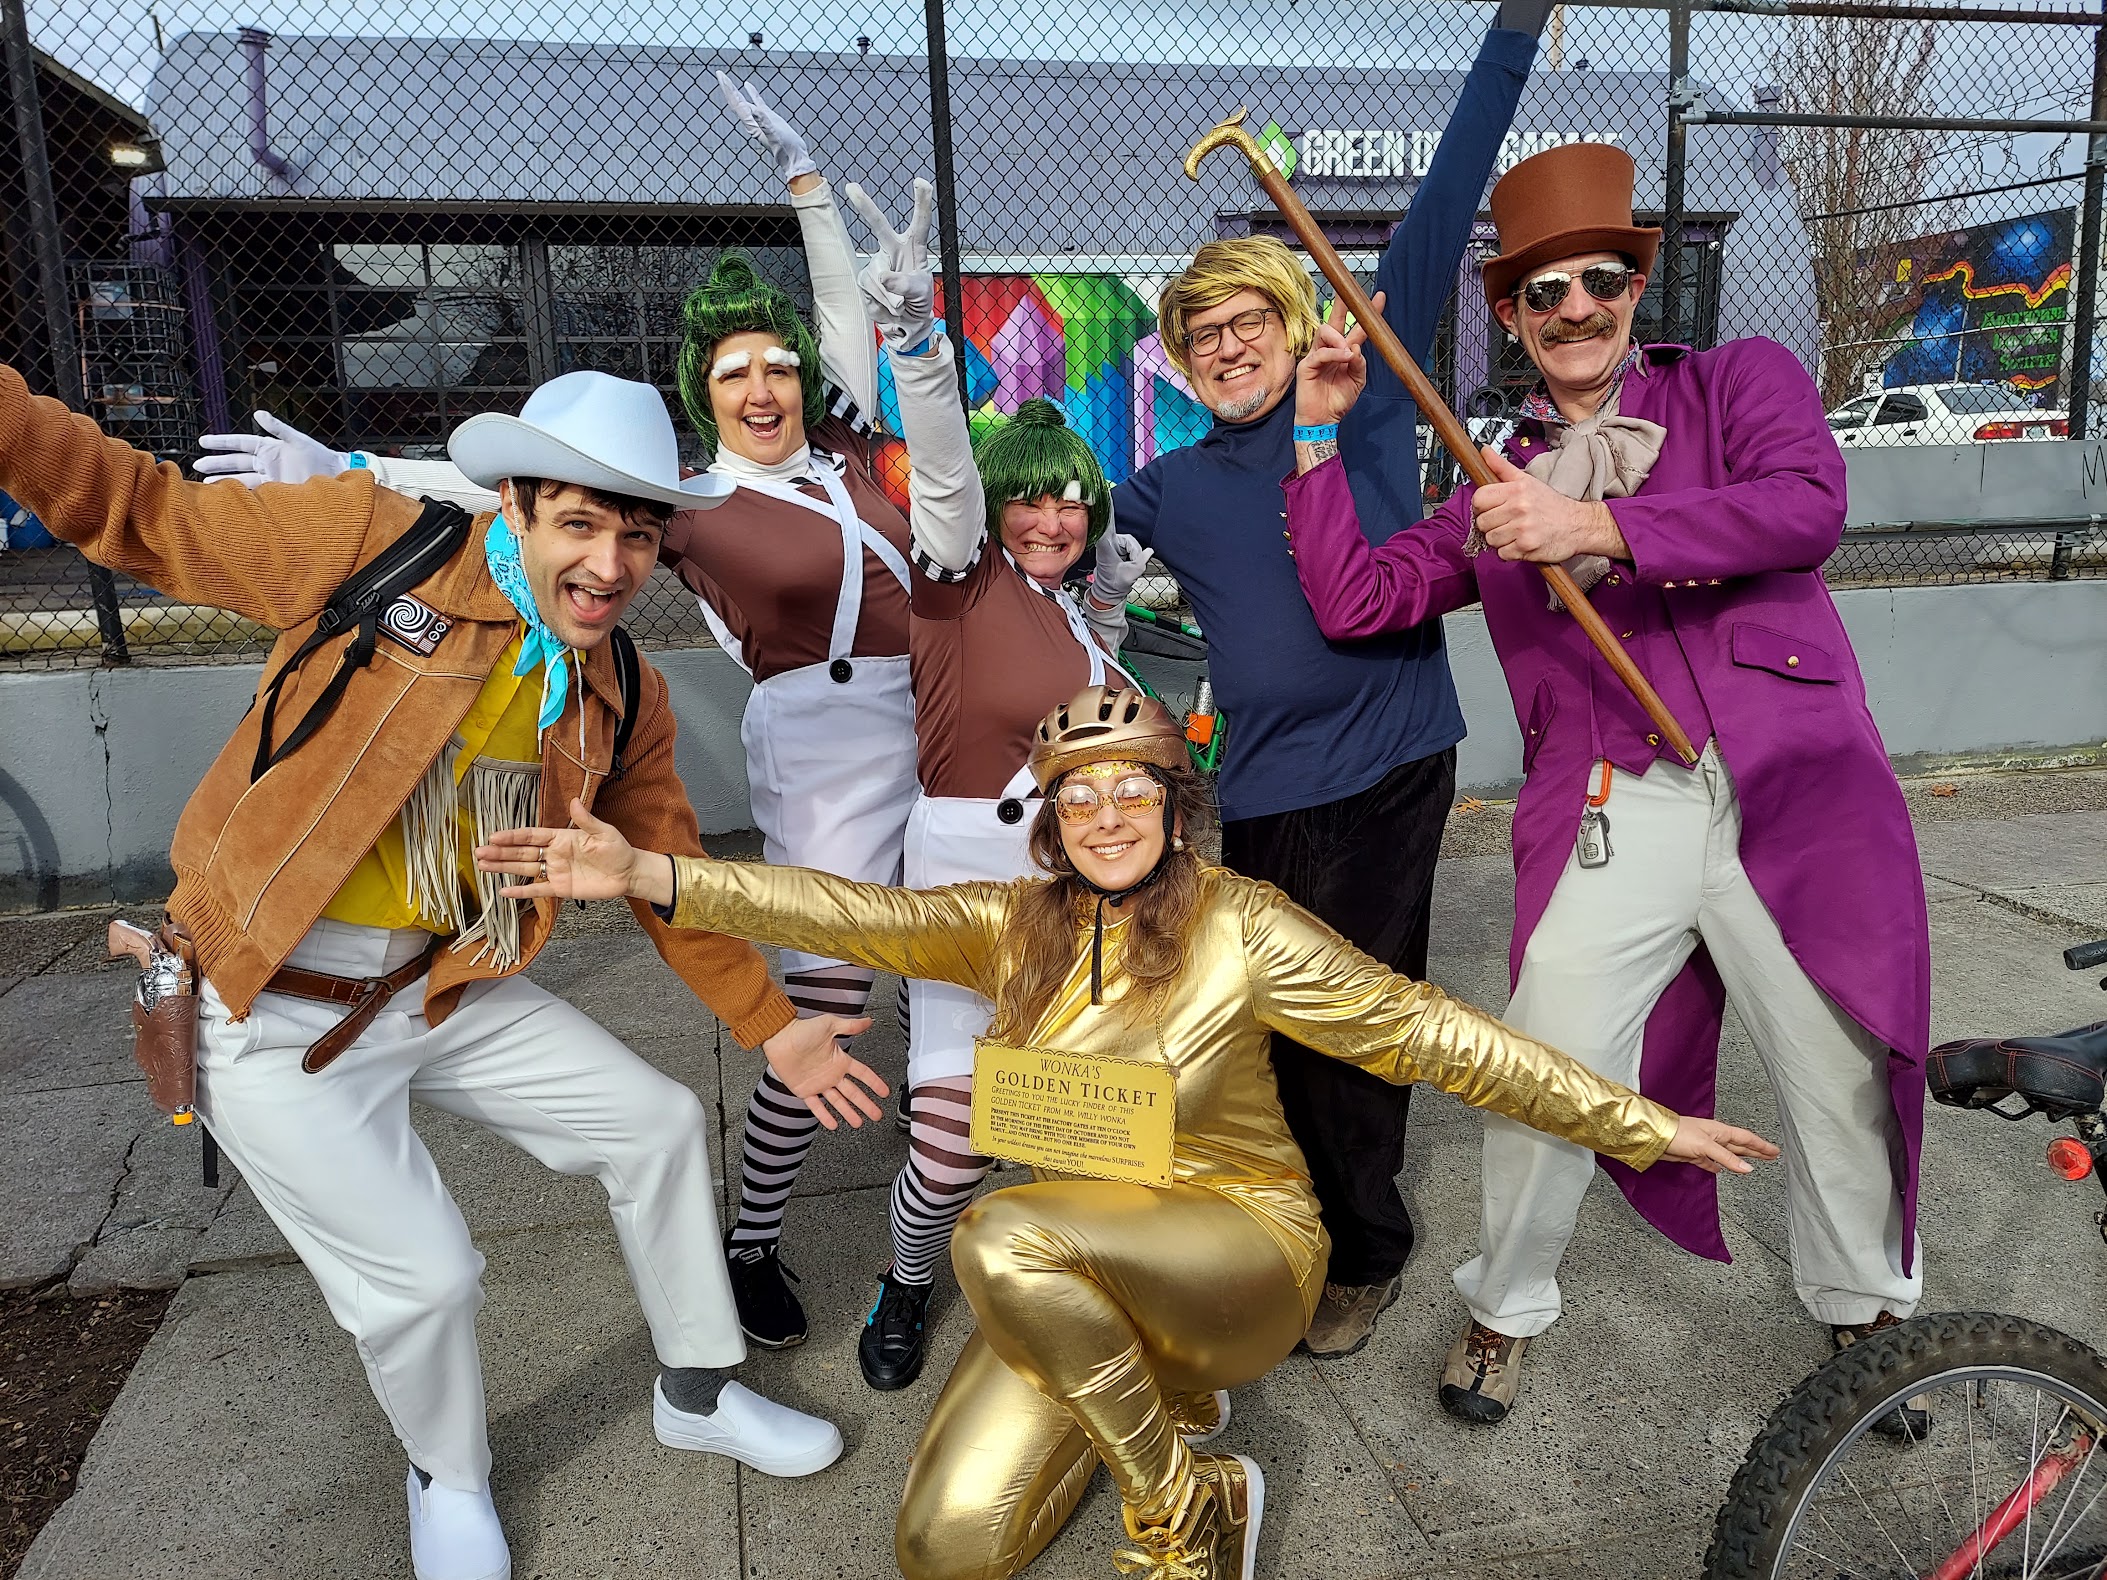 Willy Wonka and friends